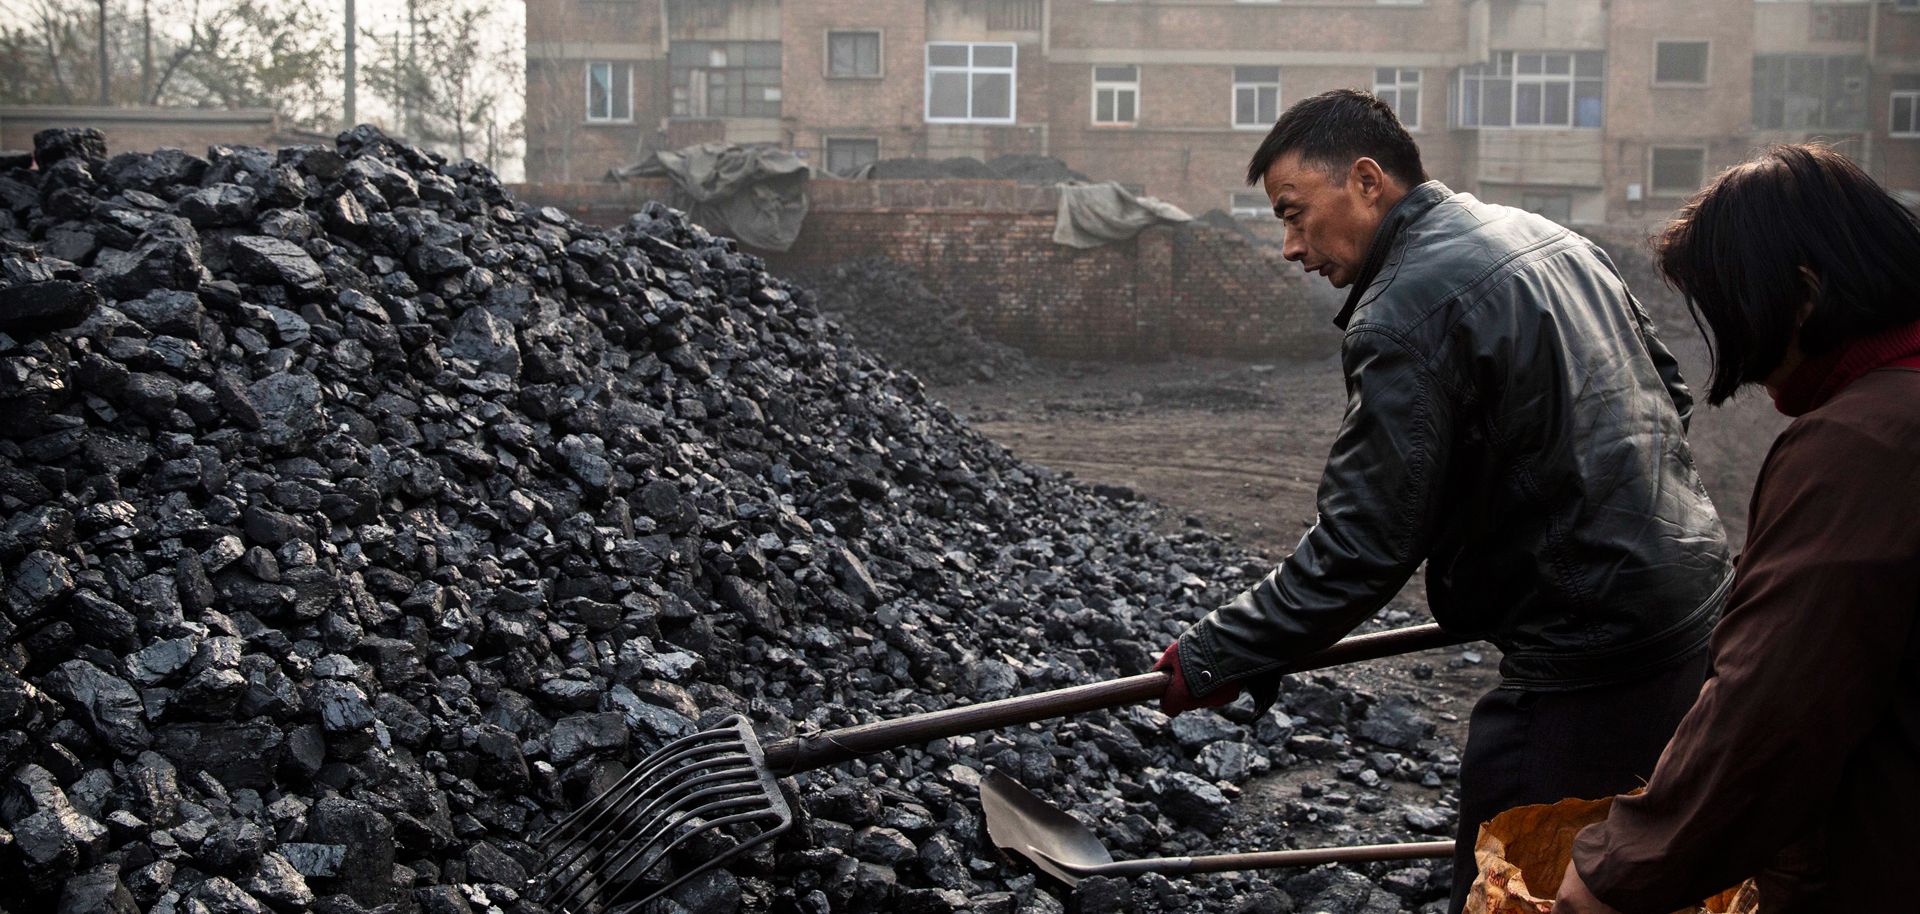 China Imposes a New Coal Production Tax